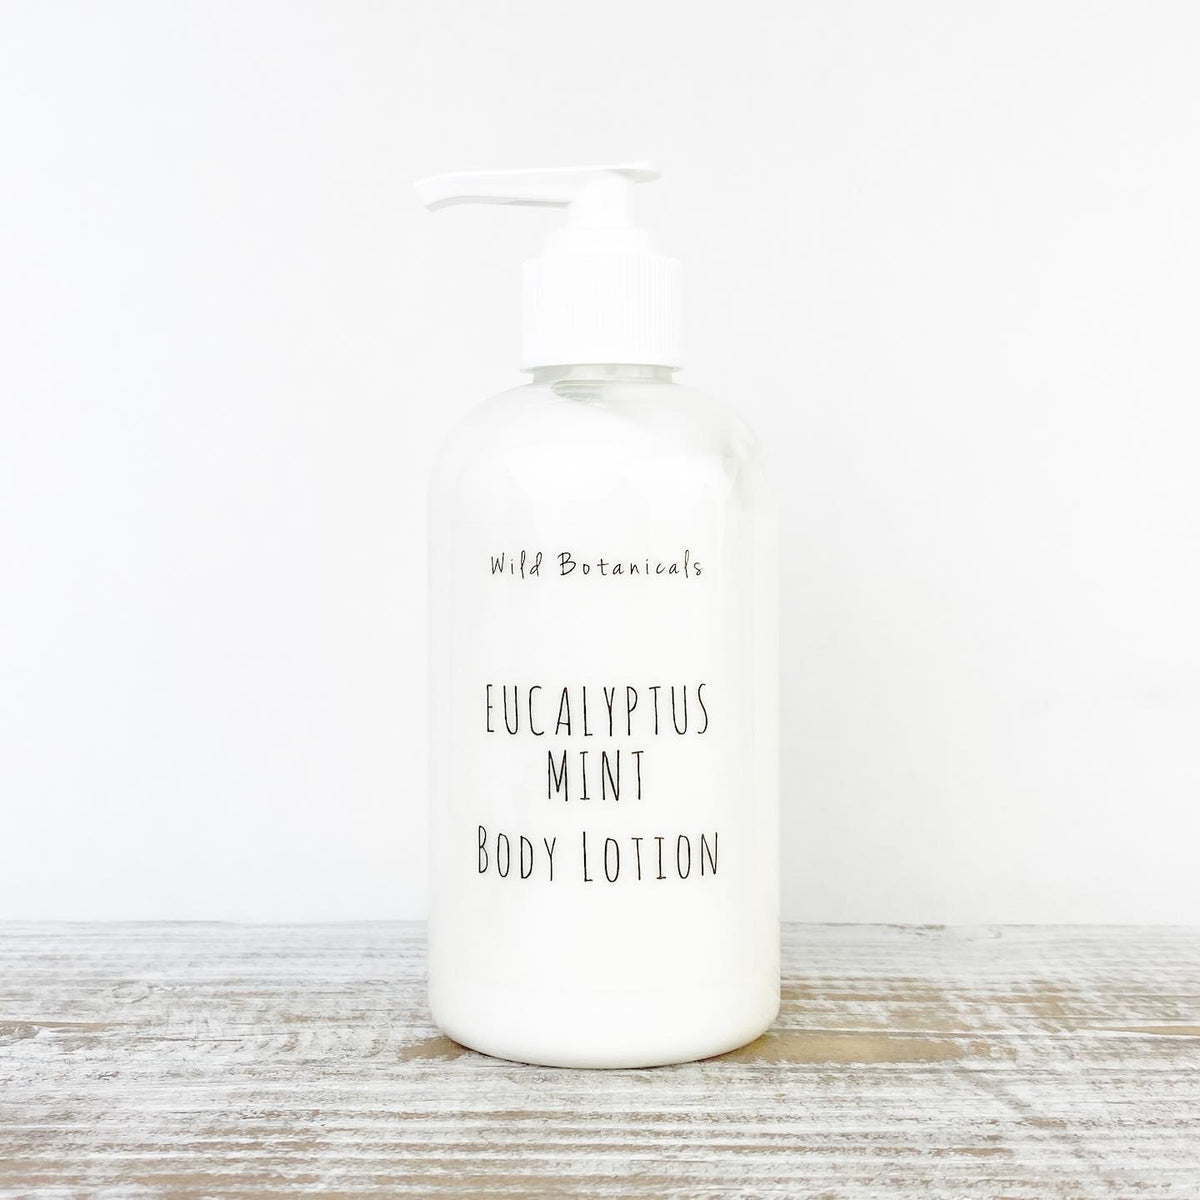 A clear plastic bottle with a pump dispenser labeled "Wild Botanicals Eucalyptus Mint Lotion - 8 oz" against a plain white background with a light wood surface.